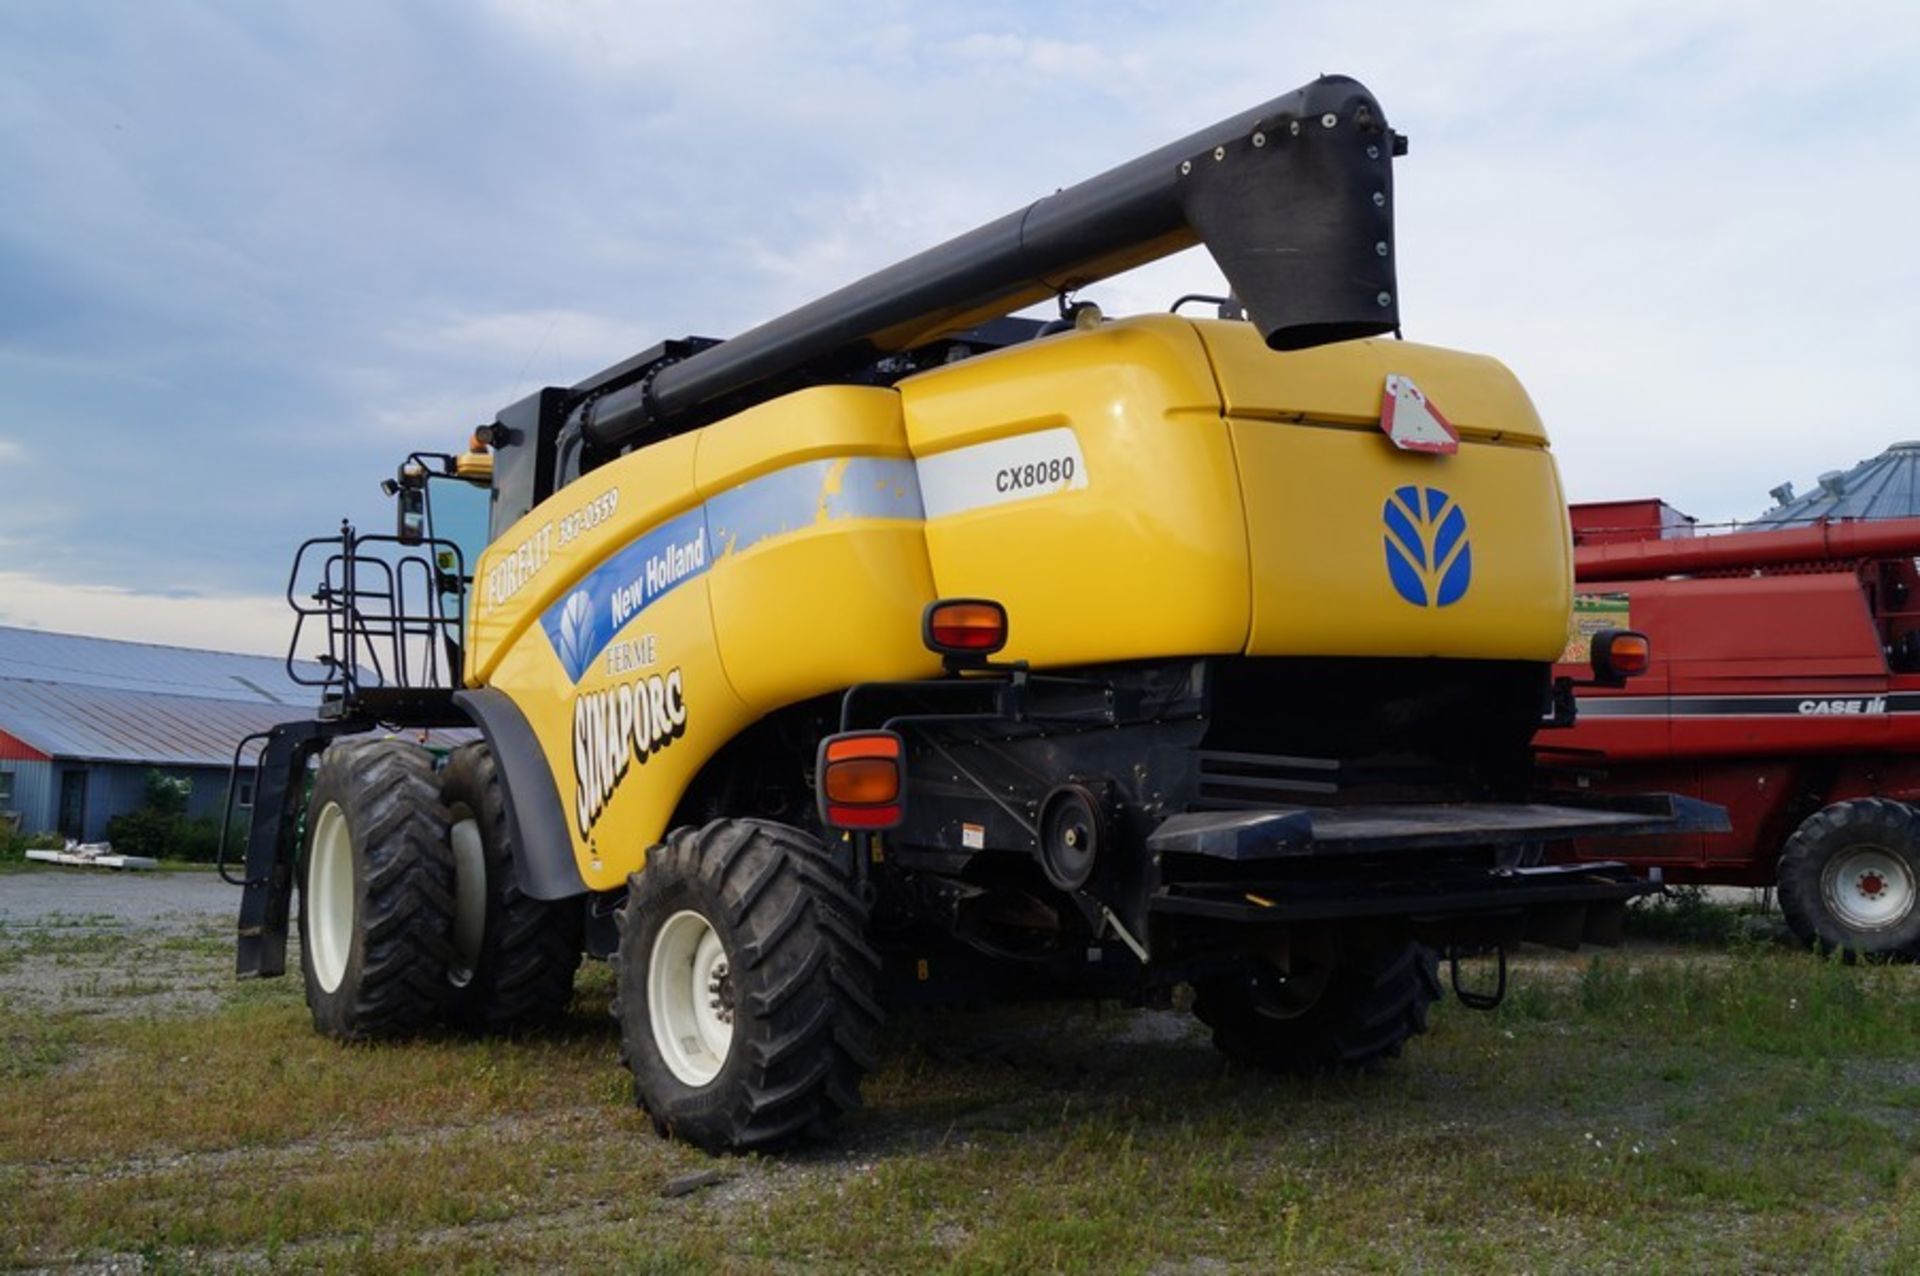 2008 NEW HOLLAND CX8080 Combine Harvester, 4700 Sep.hrs - Image 8 of 24